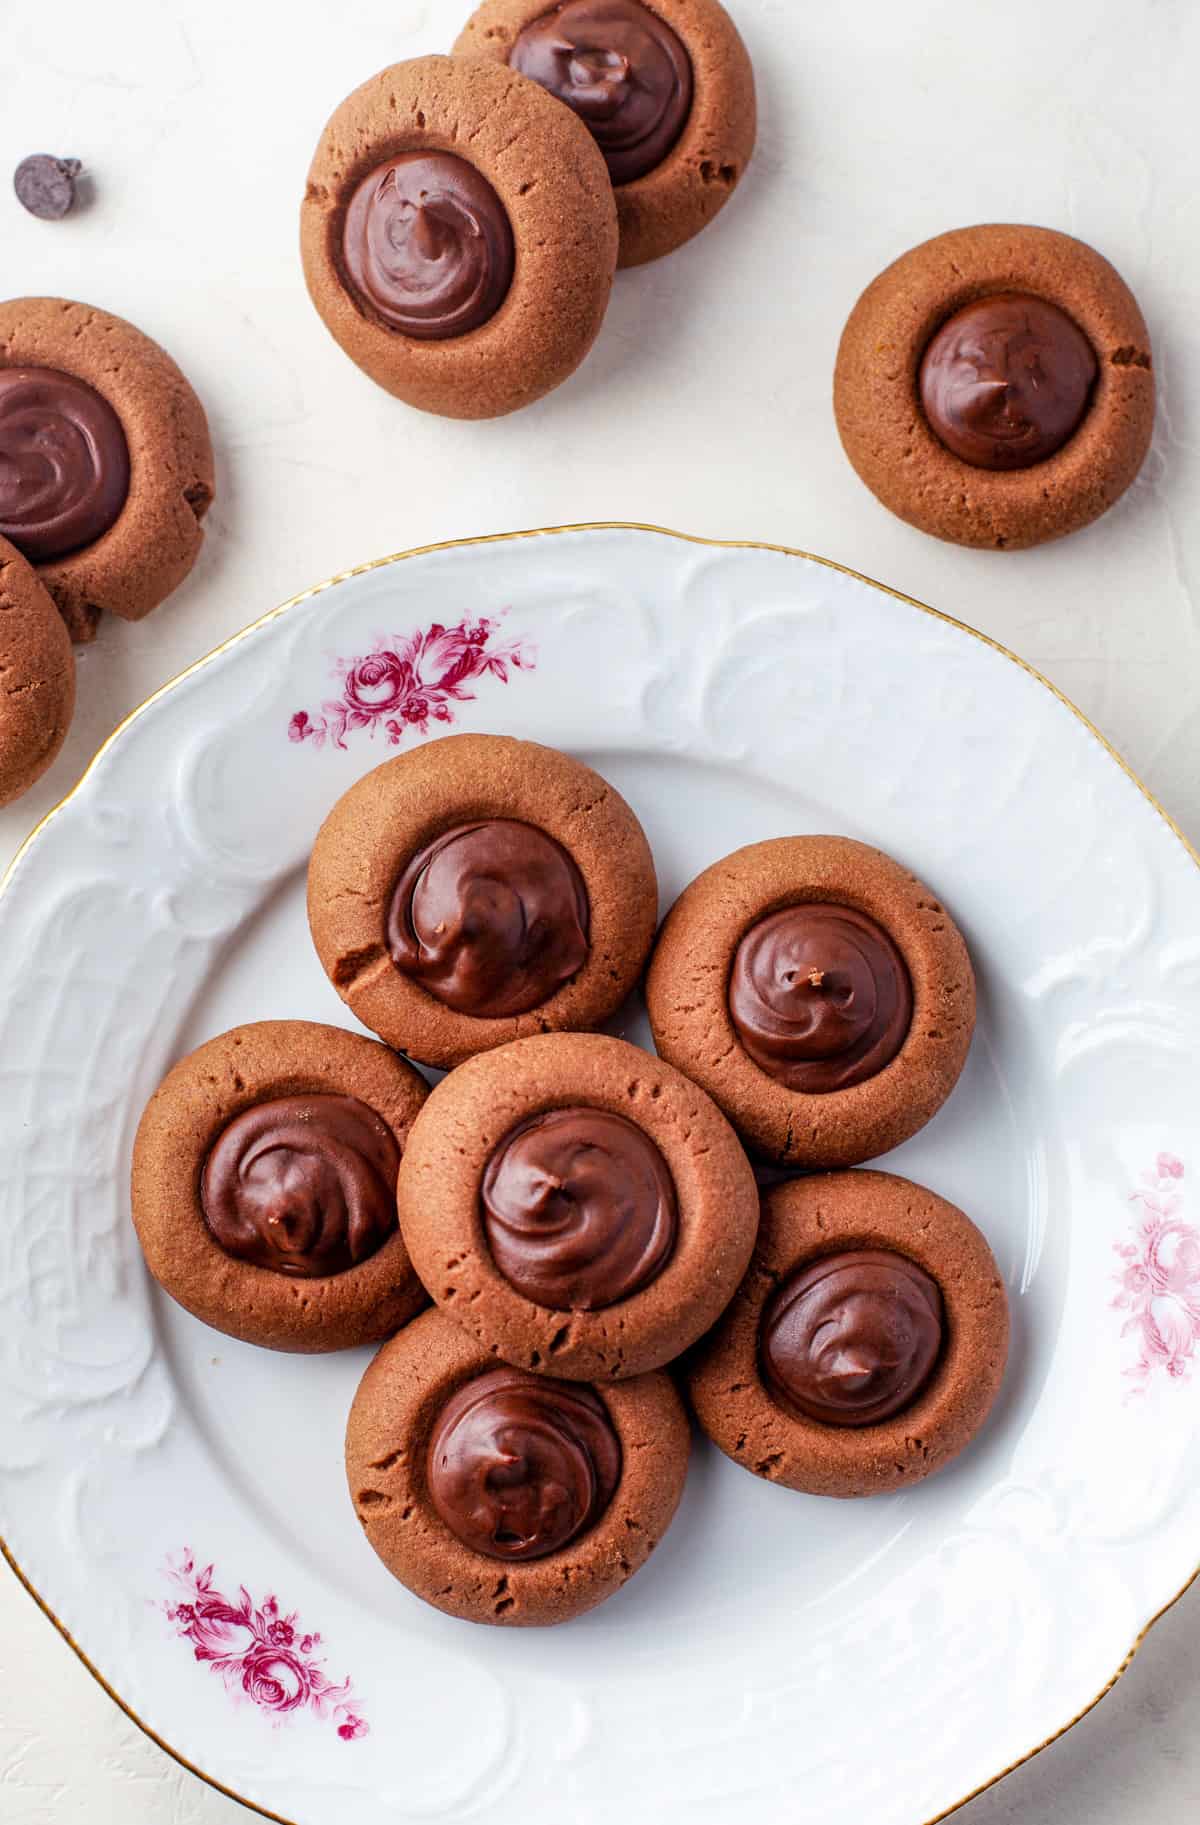 Overhead of Chocolate Thumbprint Cookies on plate with more cookies beside plate.